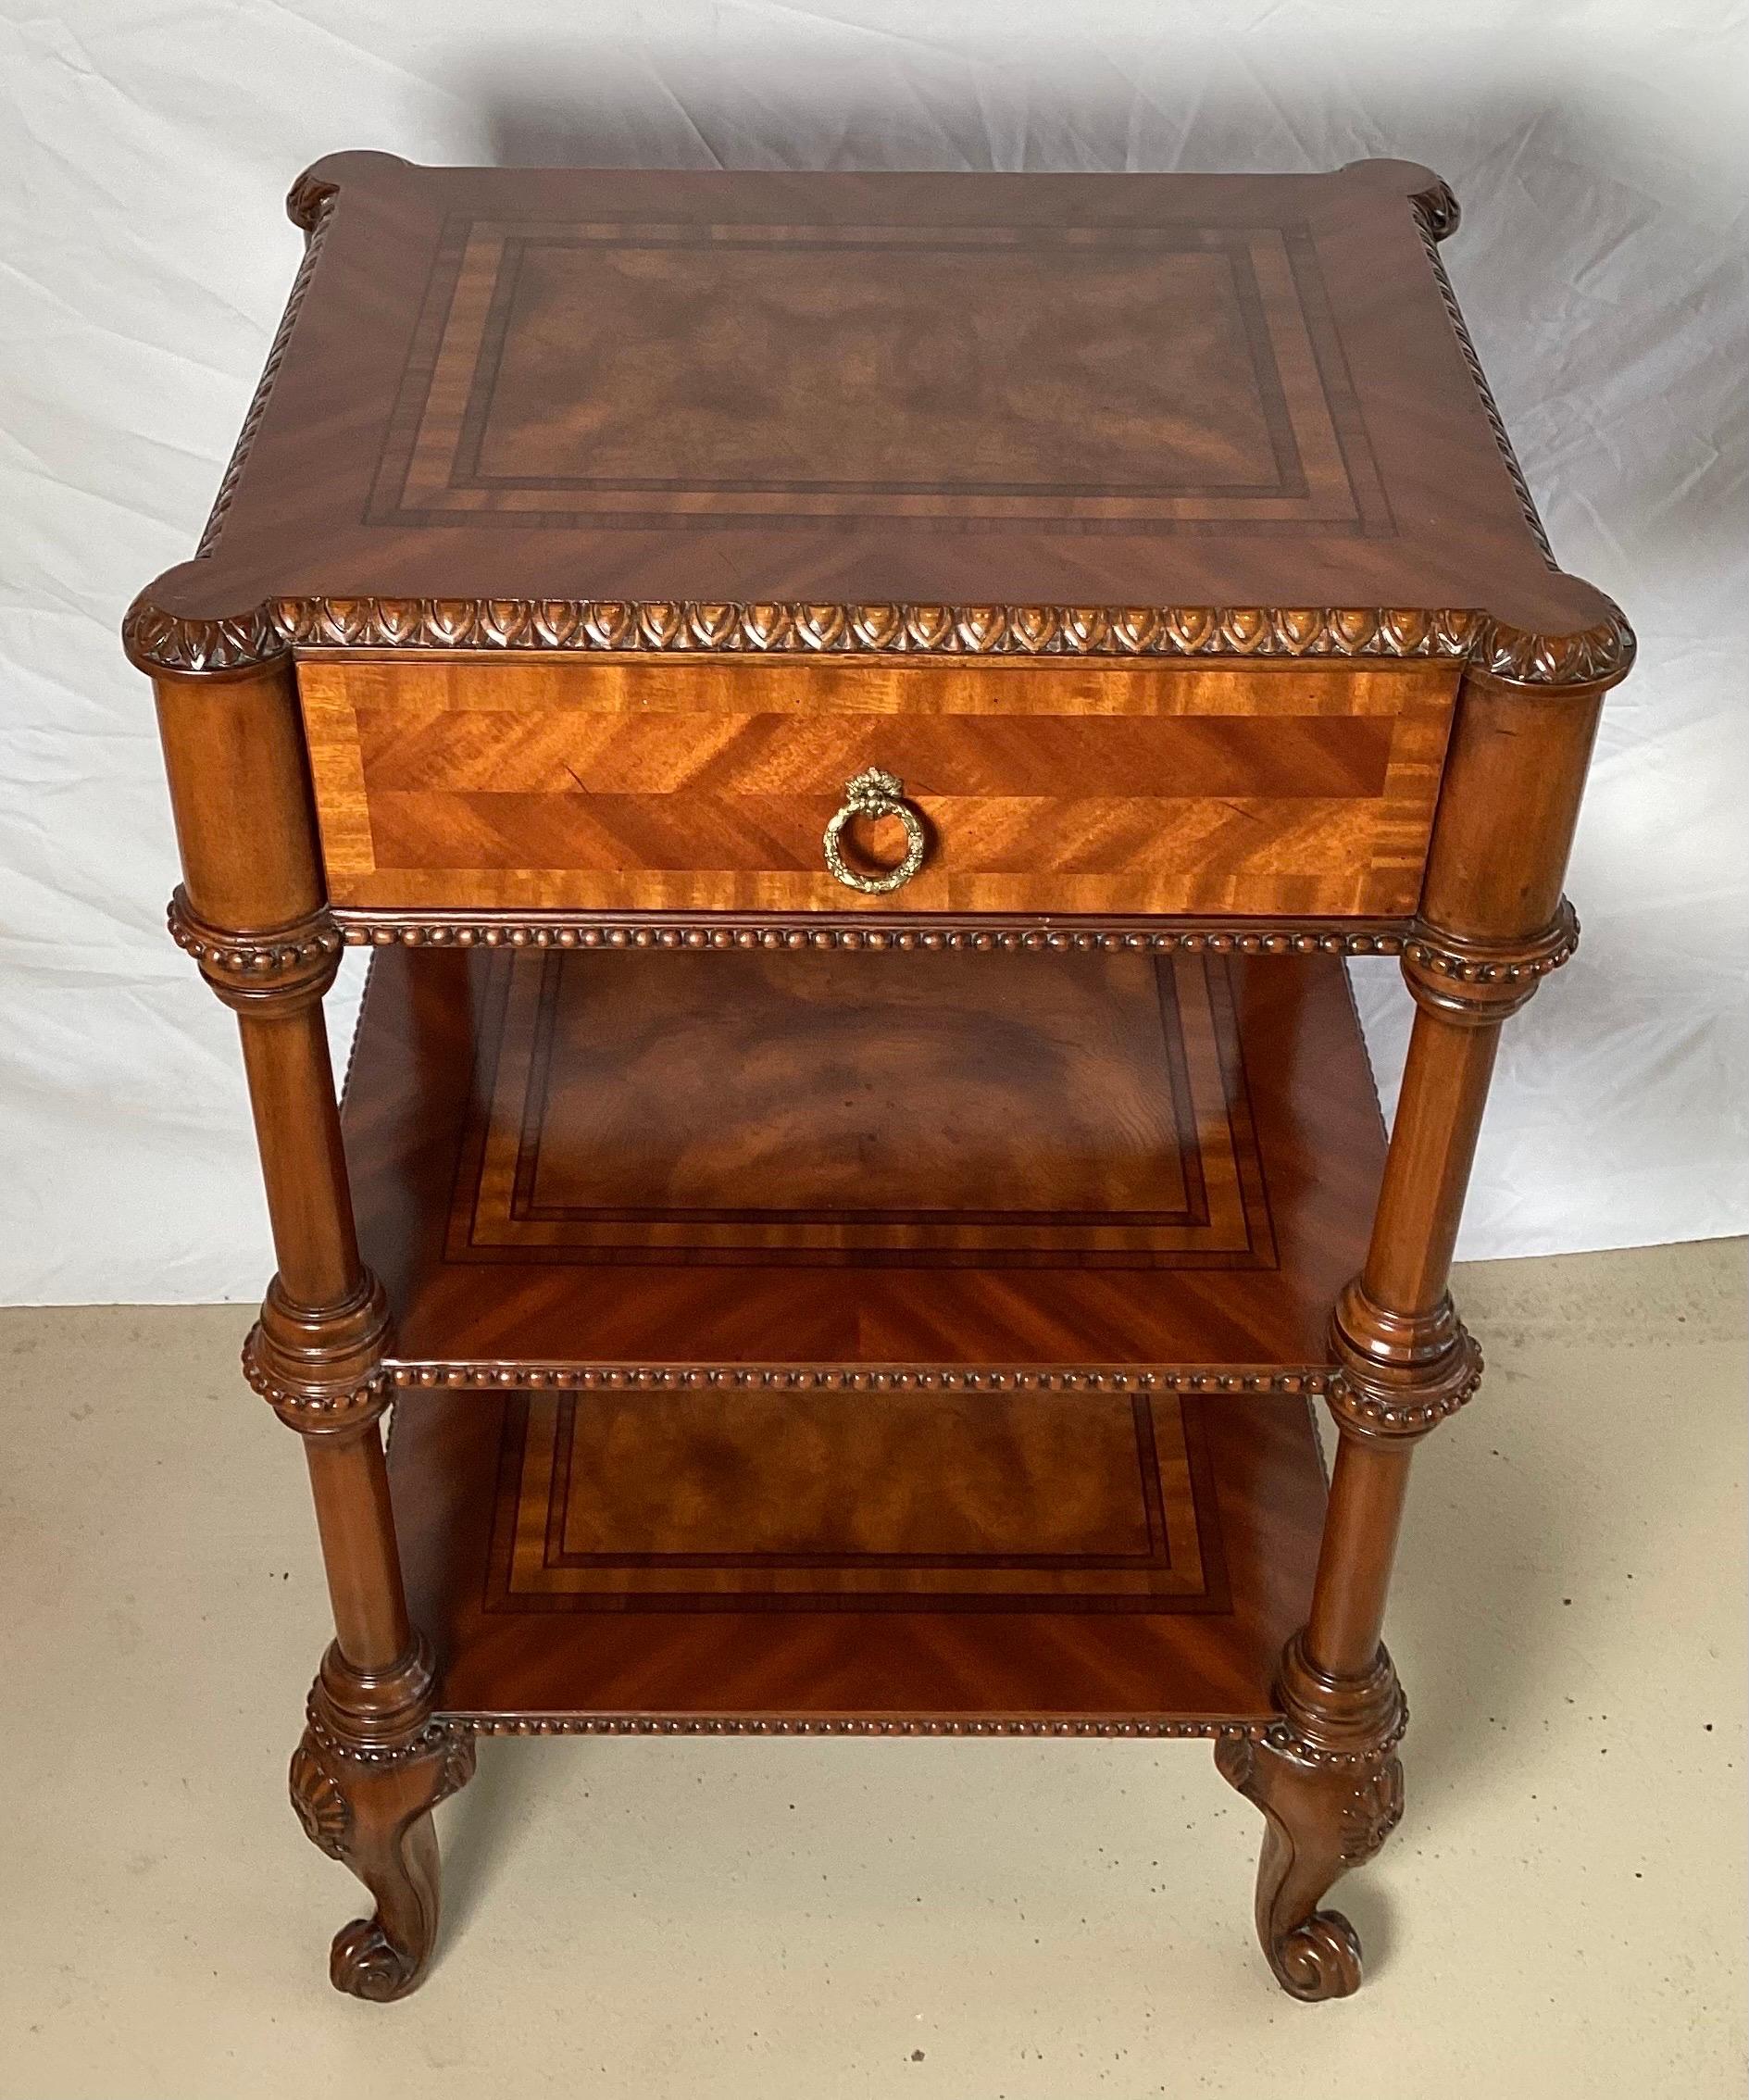 Elegant tiered accent table with top drawer by Maitland Smith. The drawer with two shelves under, supported by carve mahogany cabriole legs. The top with beautiful matched inlays of burl and mahogany. The top with egg and dart carving on the edge.